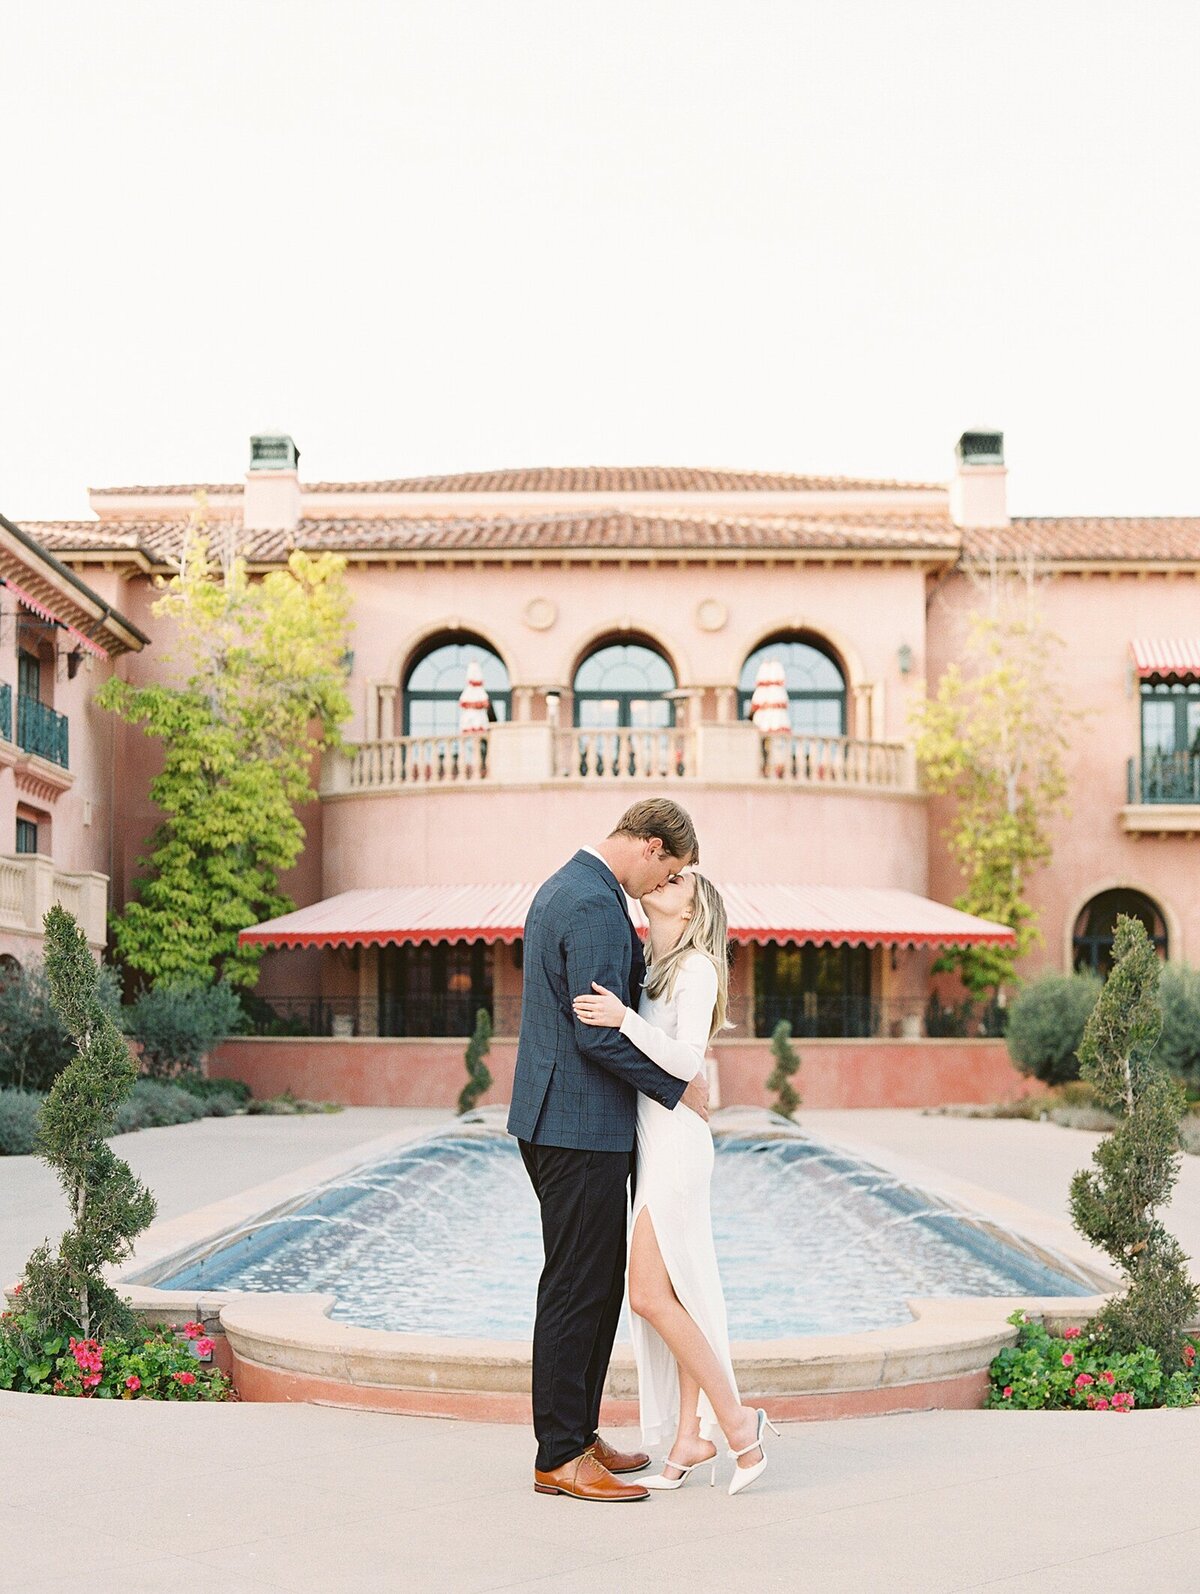 Fairmont Grand Del Mar engagement session by Lisa Riley.